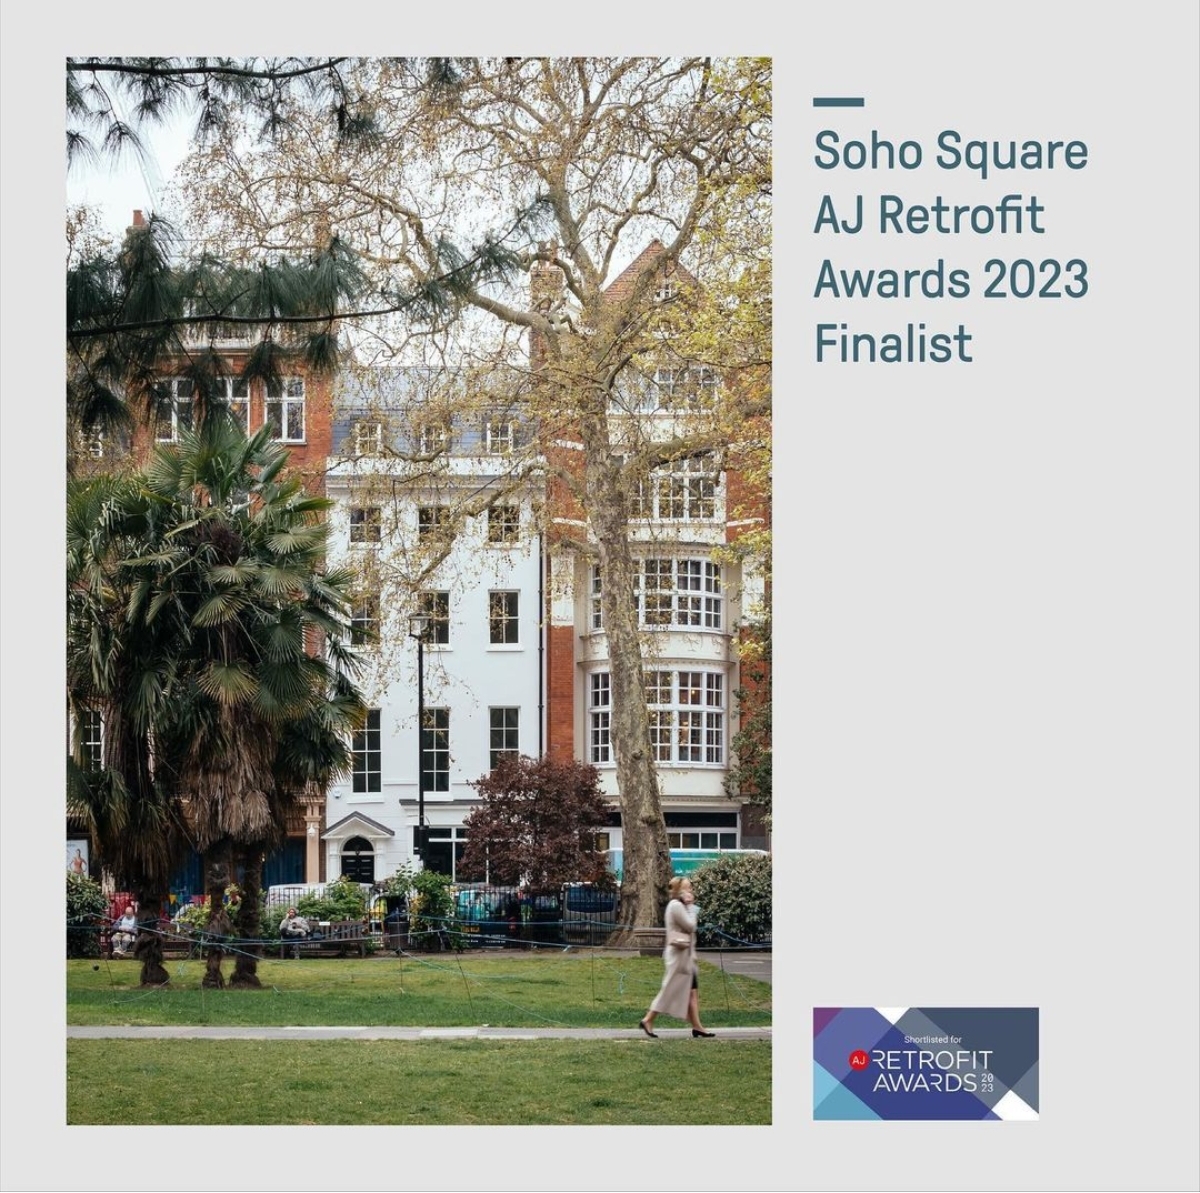 The @ArchitectsJrnal #AJRetrofitAwards finalists ceremony is this evening. Good luck to Soho Square, our retrofit of a Grade II listed townhouse into Grade A workspaces in London #RetroFirst